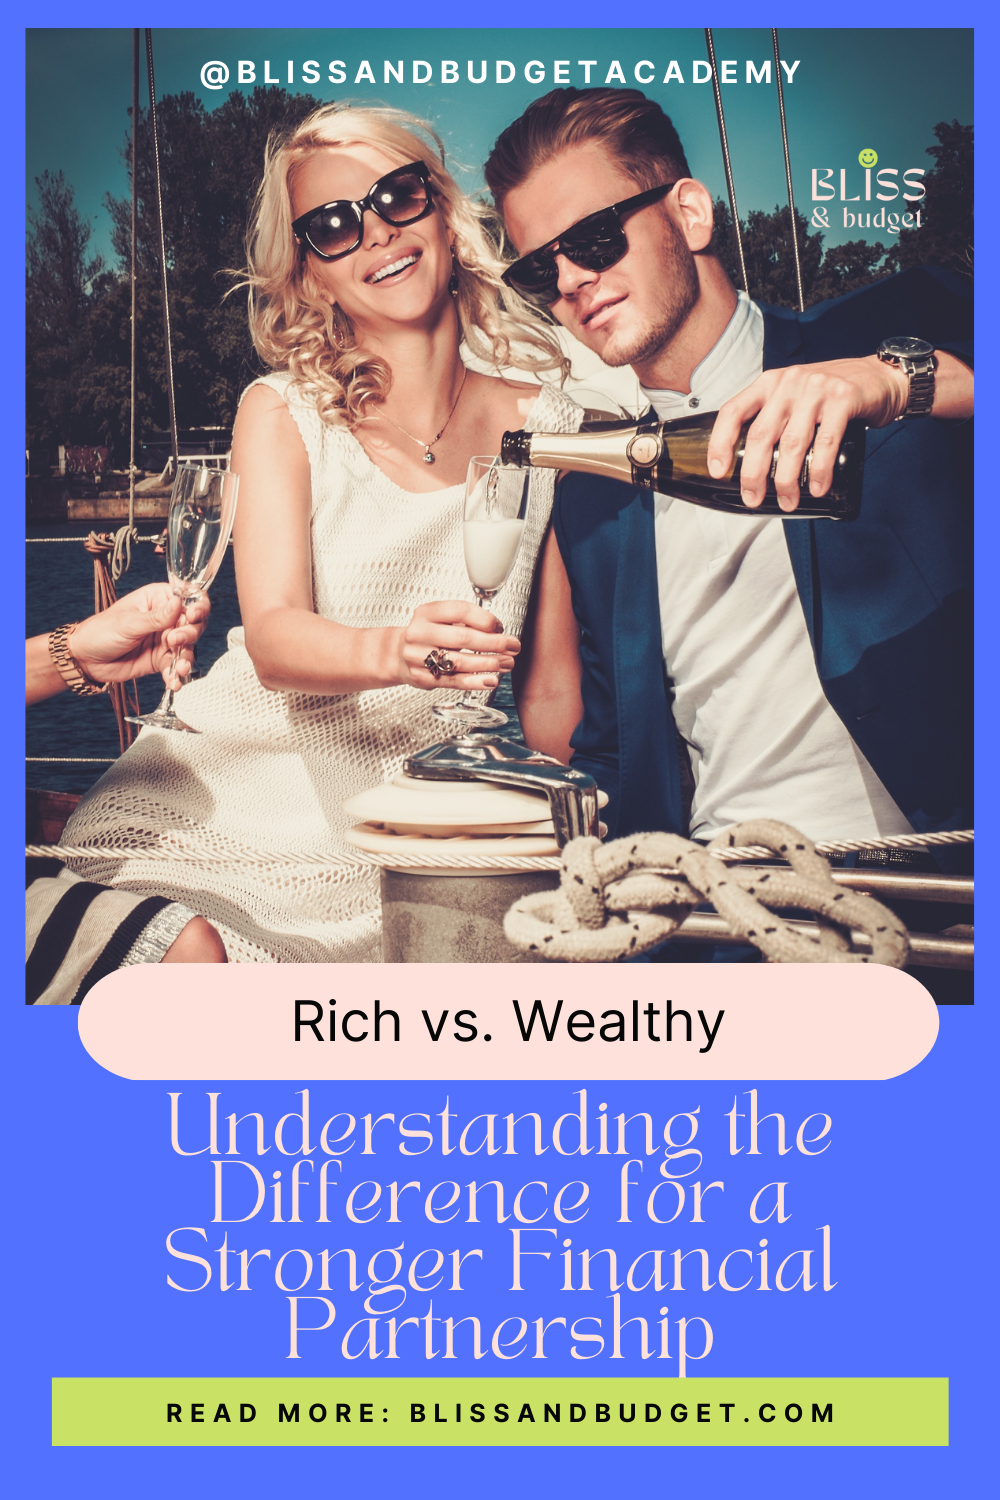 Rich vs. Wealthy: Understanding the Difference for a Stronger Financial Partnership